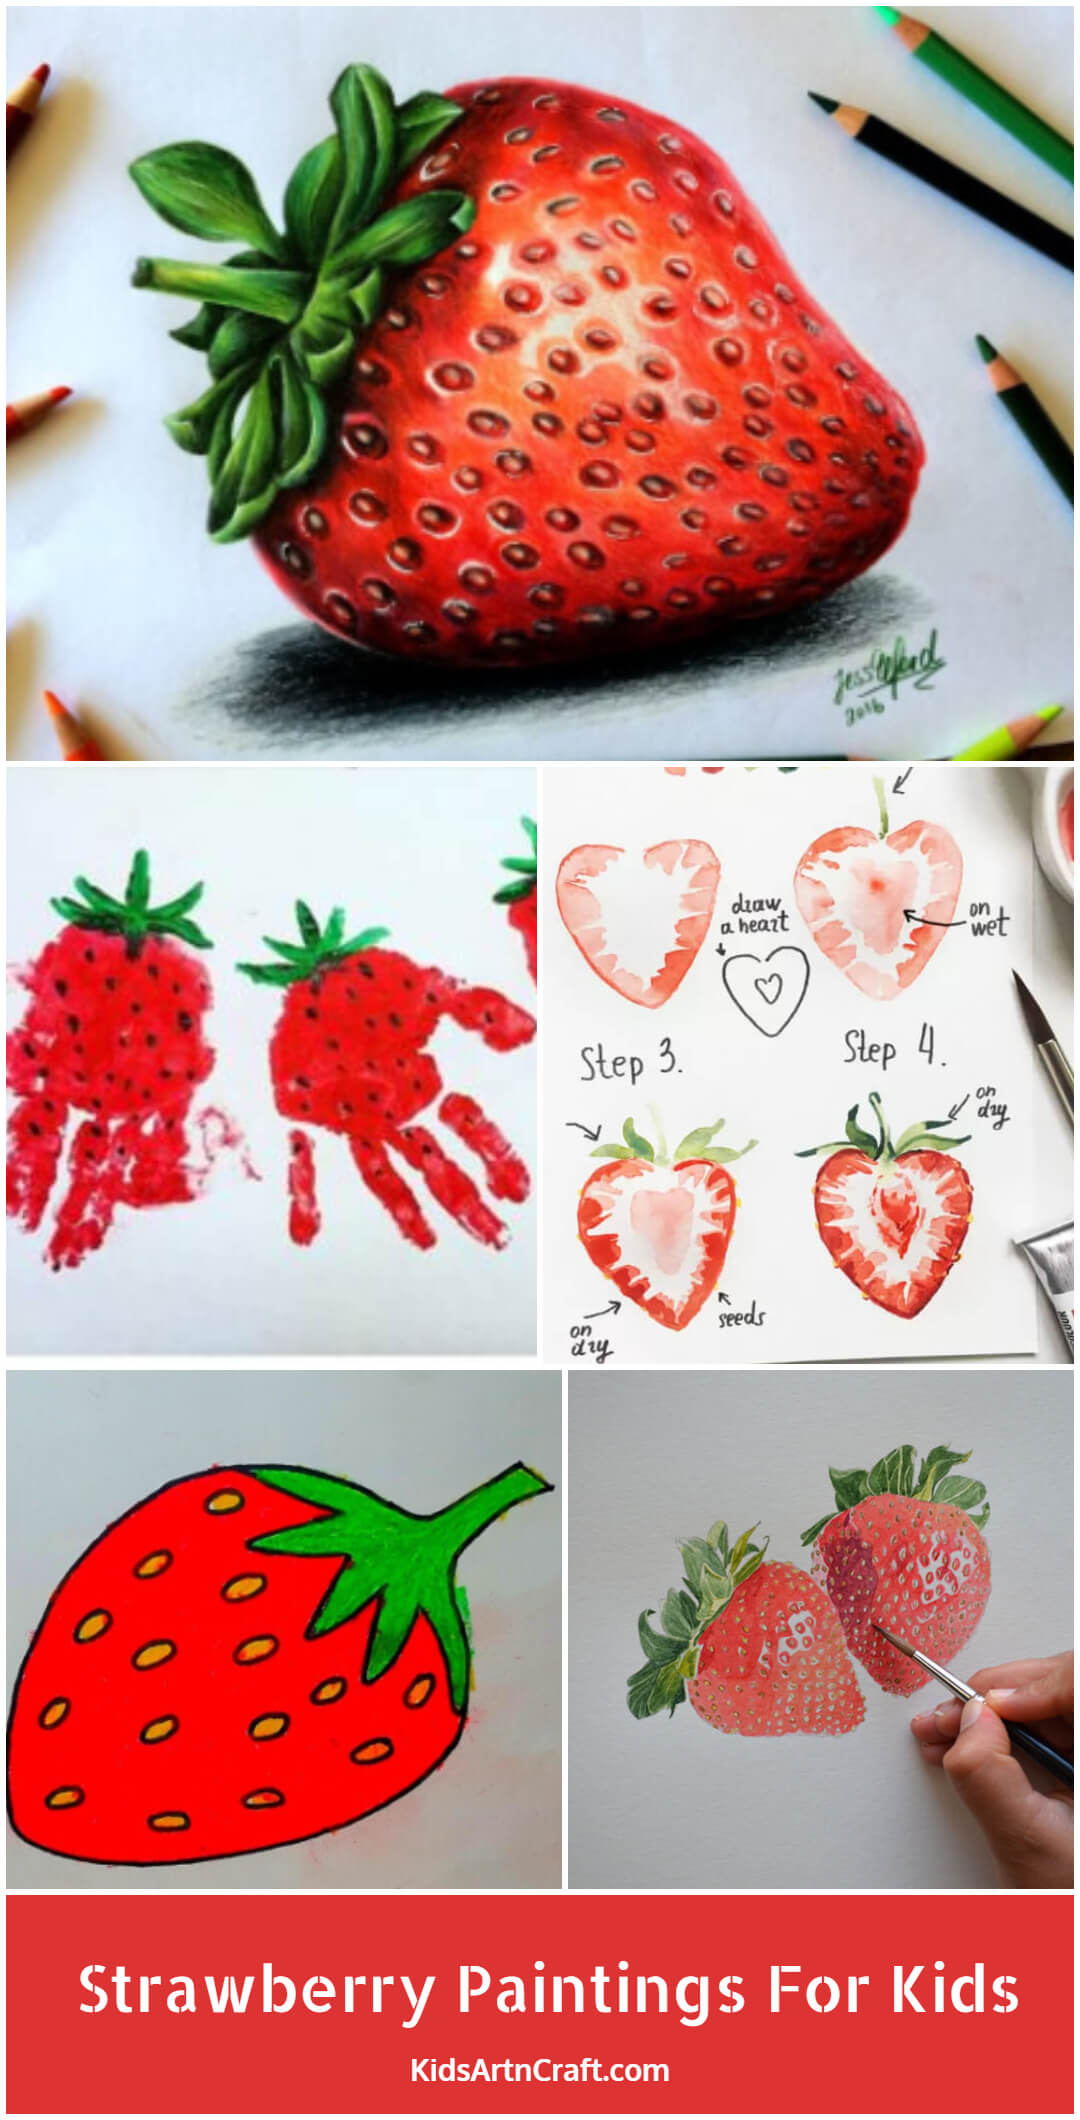 Strawberry Paintings For Kids